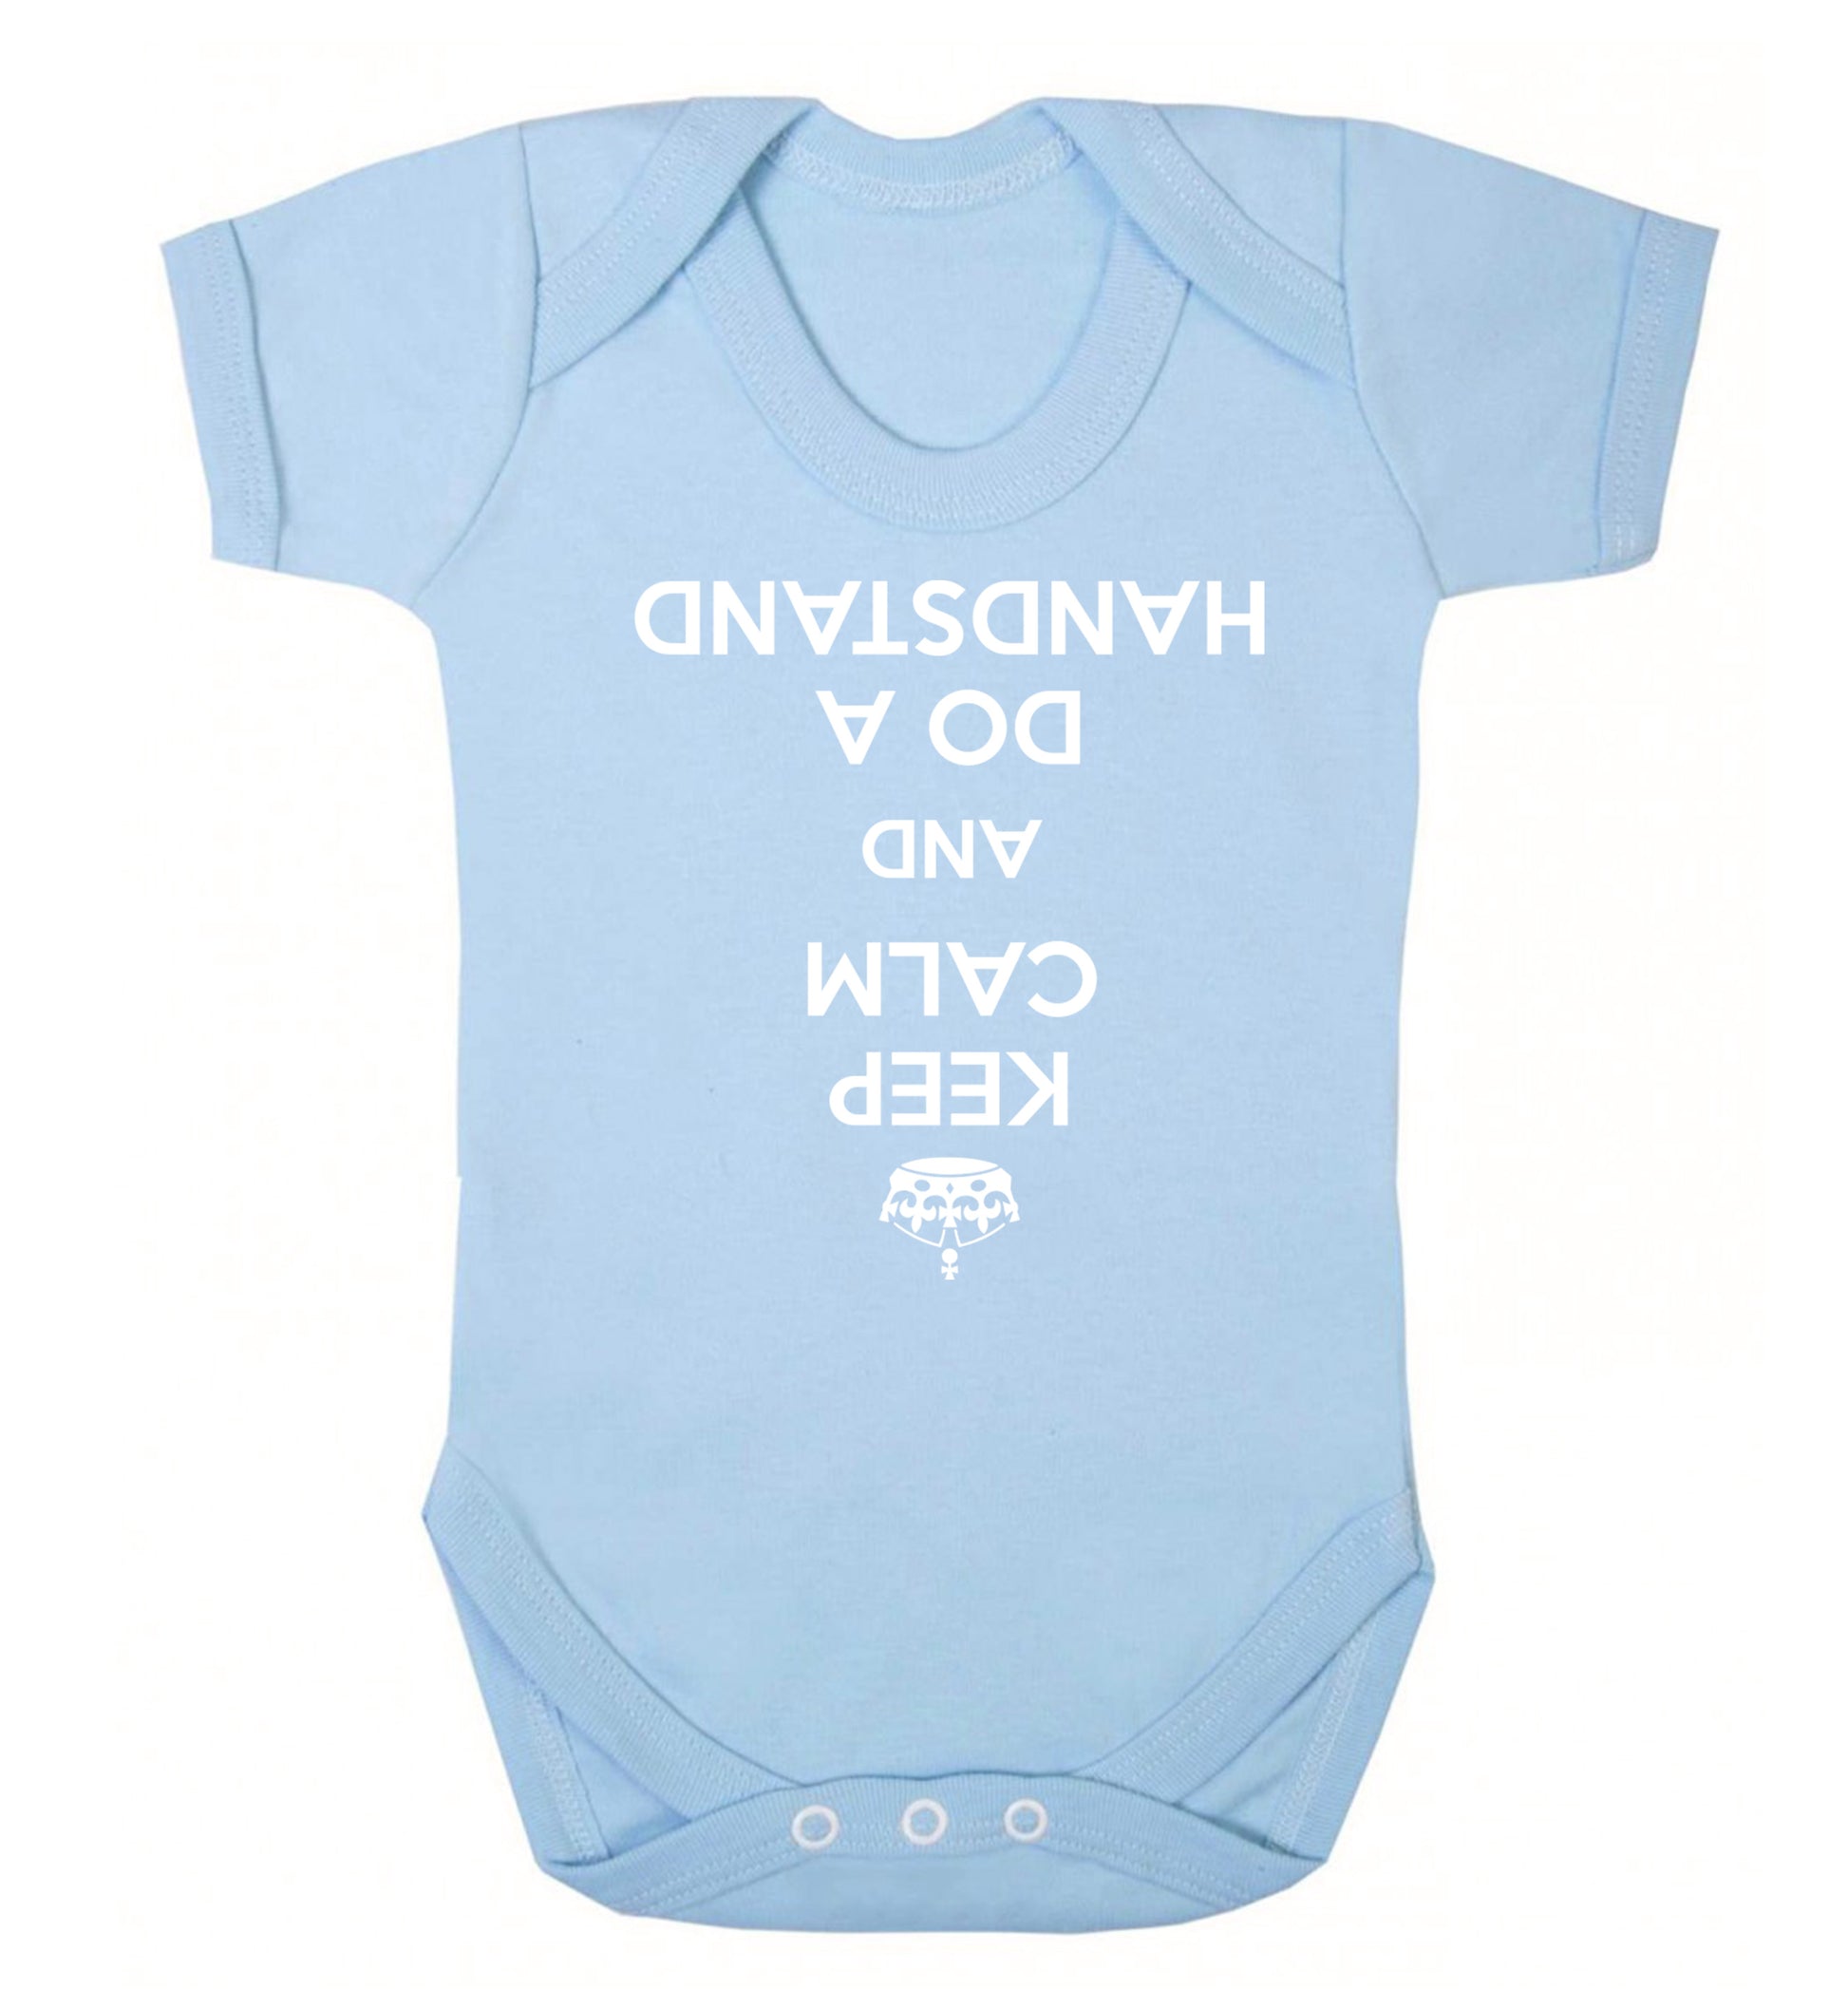 Keep calm and do a handstand Baby Vest pale blue 18-24 months